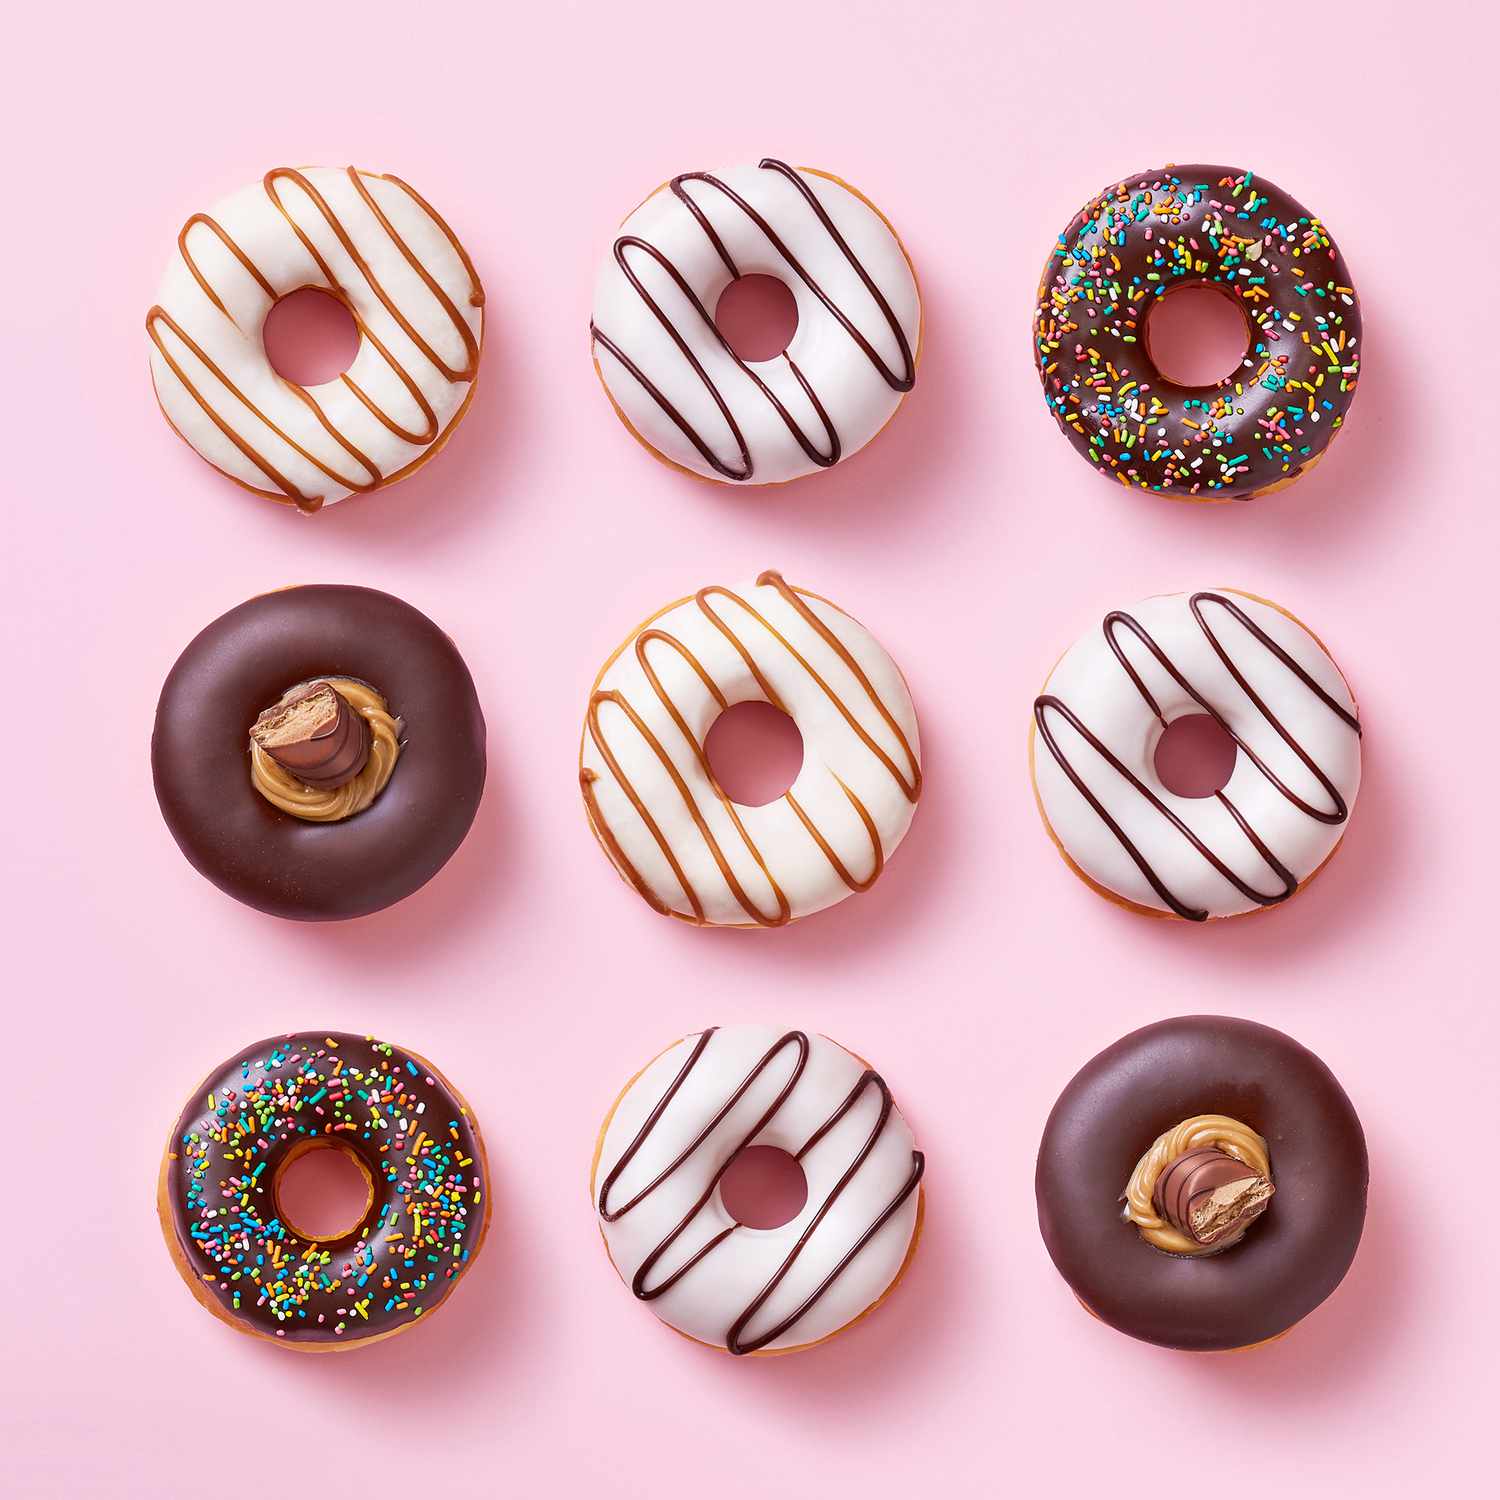 Selection of Donuts on a Pink Background